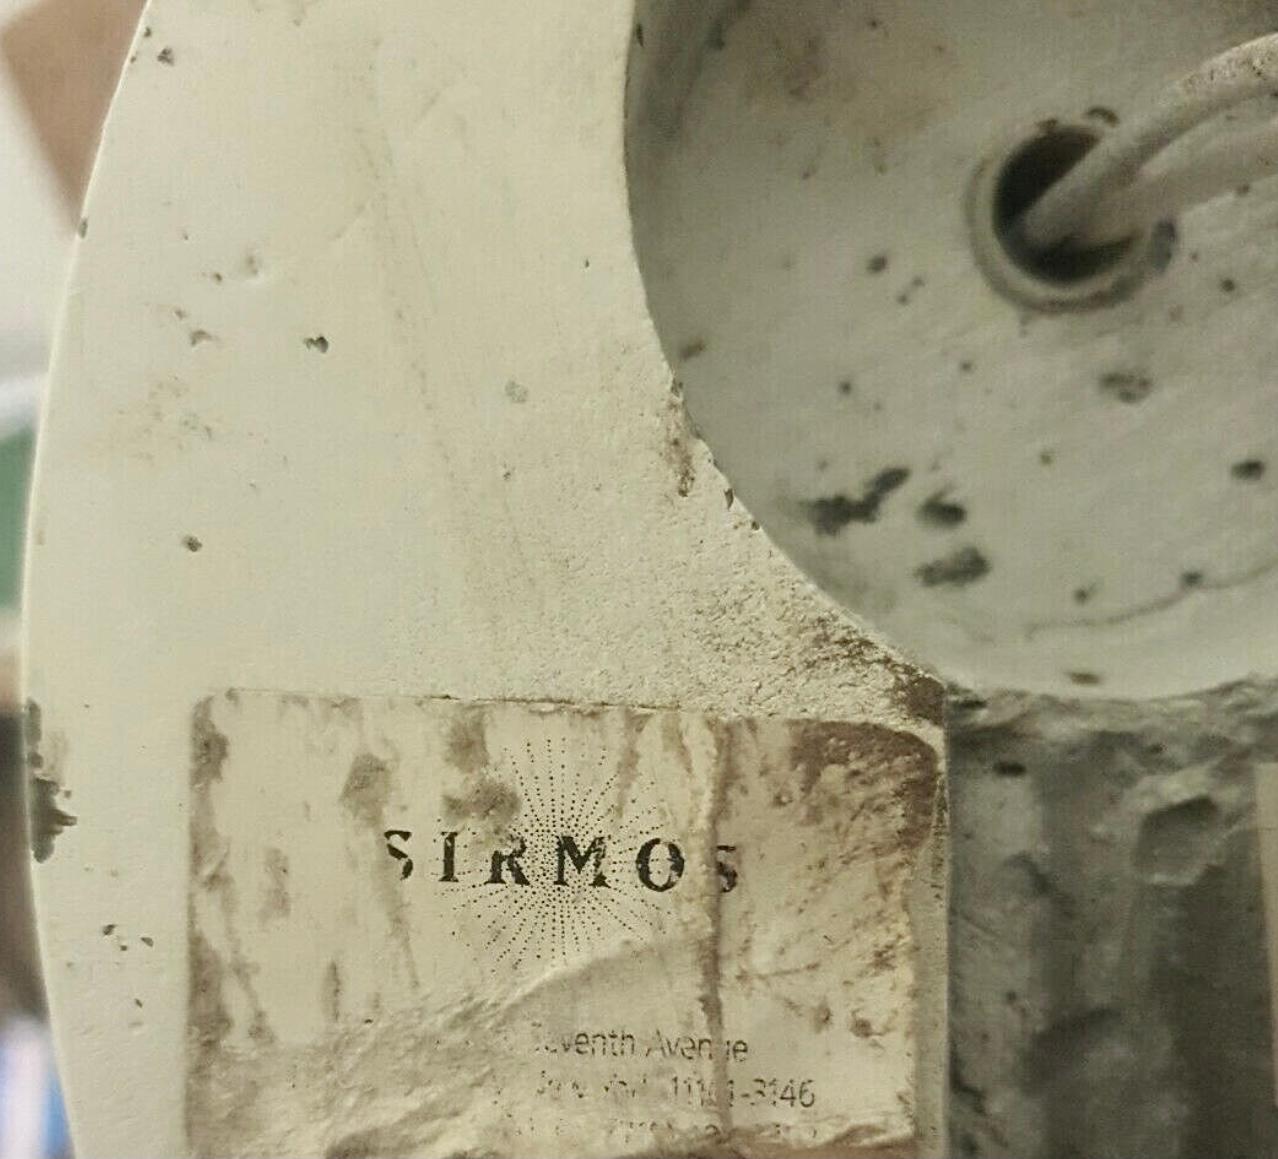 American Sirmos Plaster Hand & Torch Sconce, Midcentury Figural Fixture, 1970s, Labelled For Sale